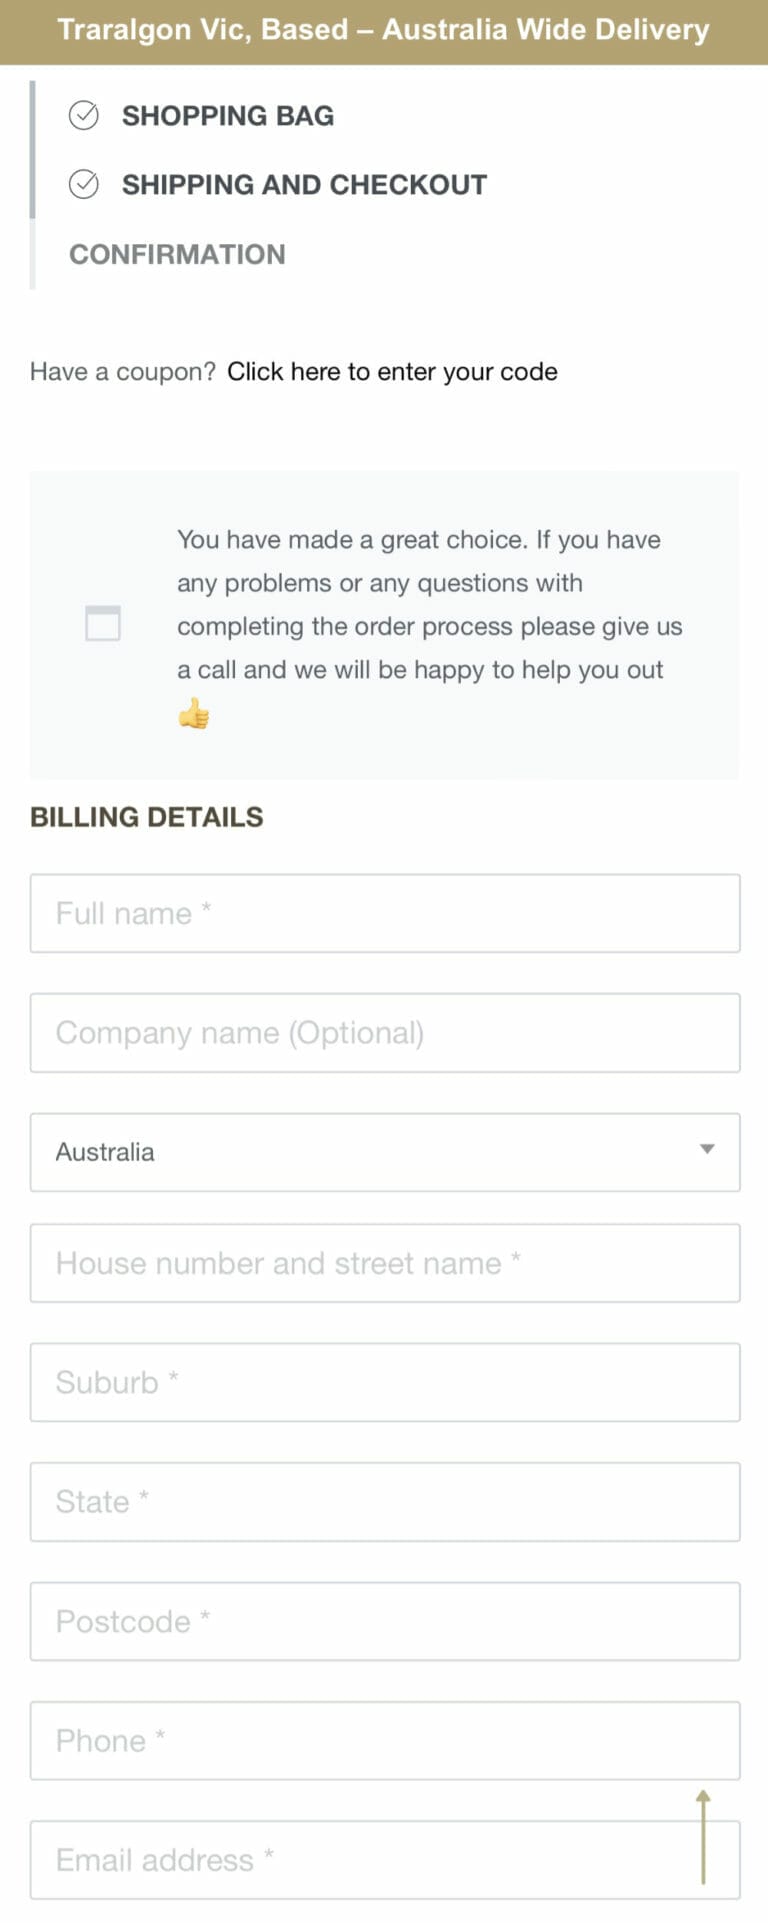 Mobile Billing Image 5. Now we on the complete your order page. Fill in your billing details this is for your tax invoice & your records.